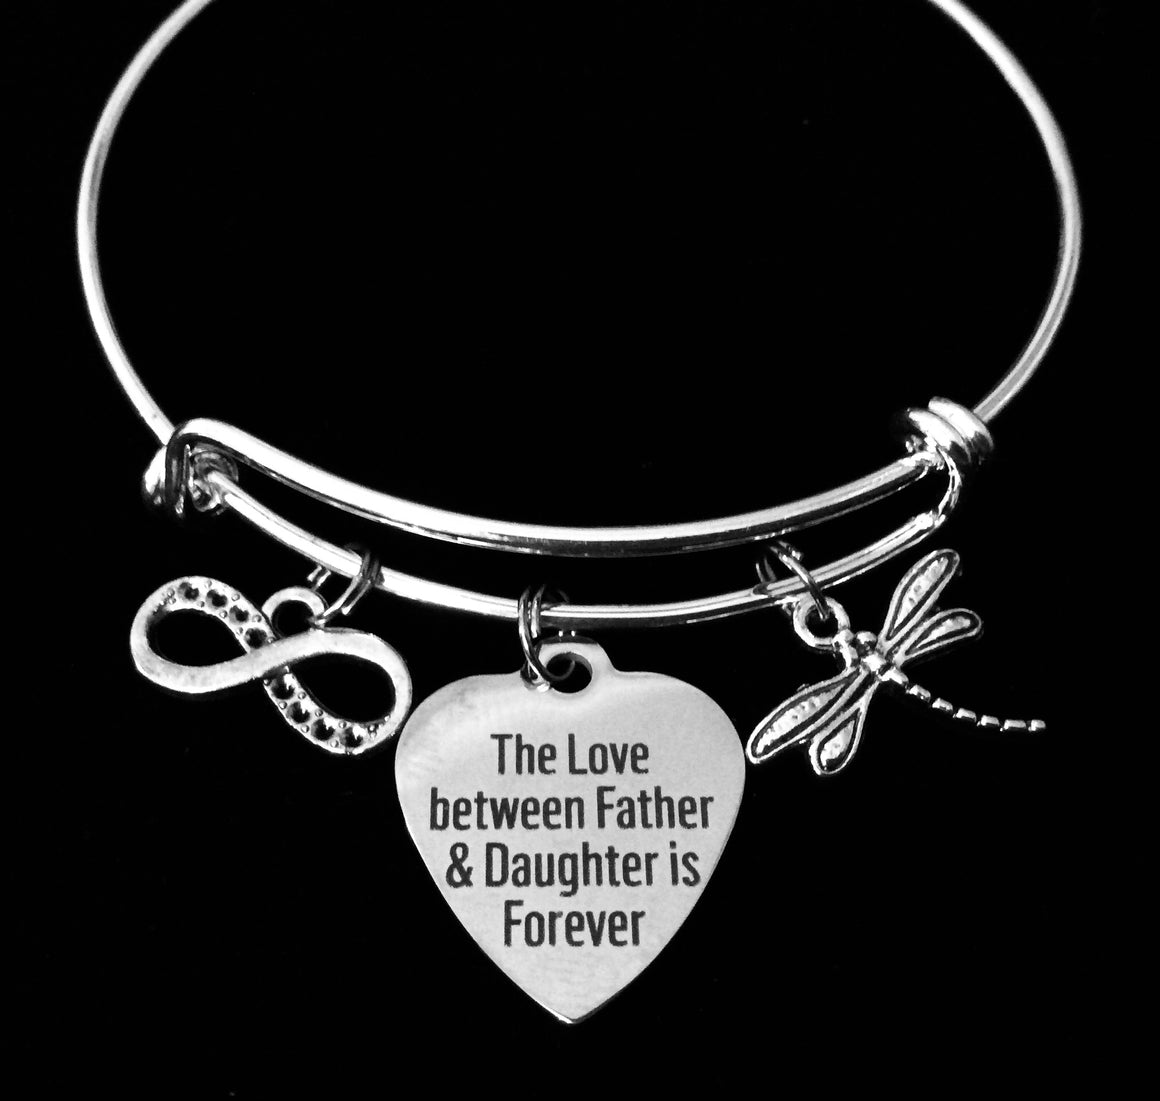 Father and Daughter Infinity Expandable Charm Bracelet Adjustable Silver Wire Bangle Gift